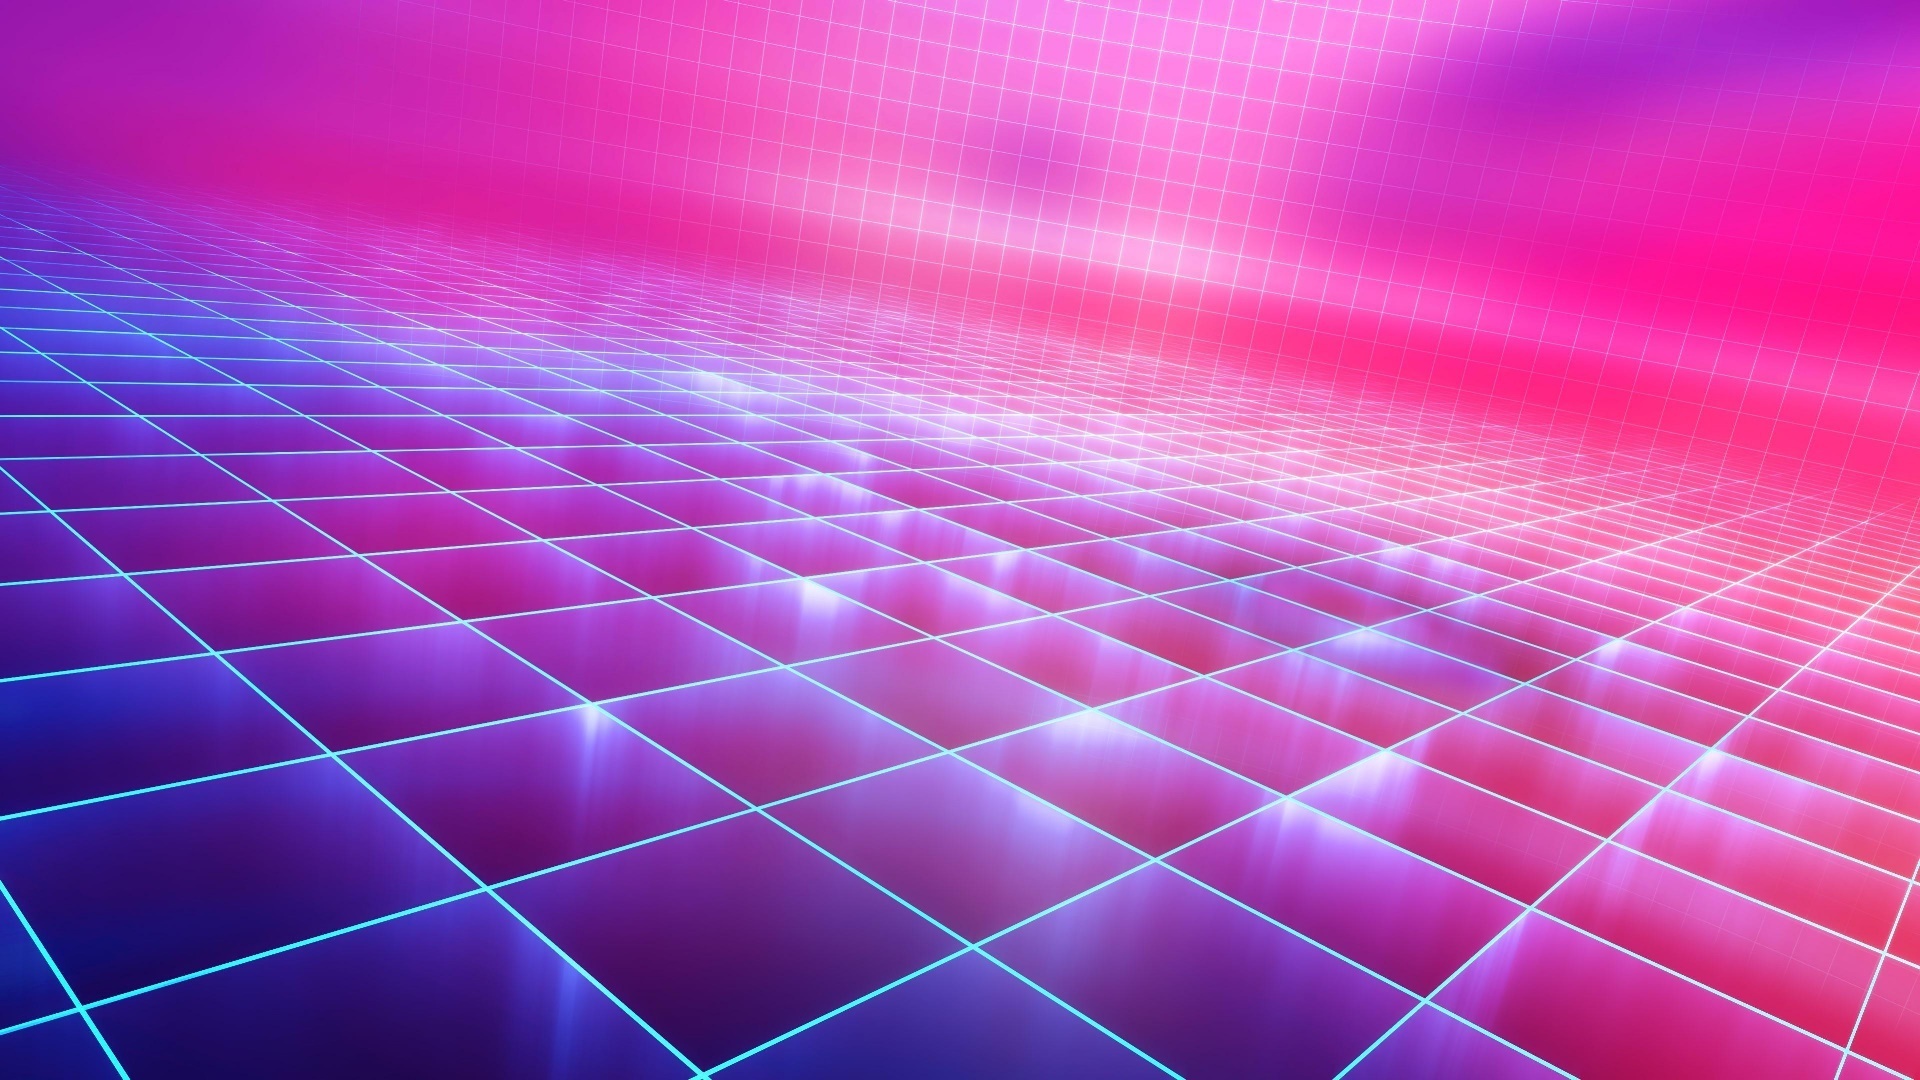 Neon Abstract Wallpaper Colorful - KDE Store 1920x1080